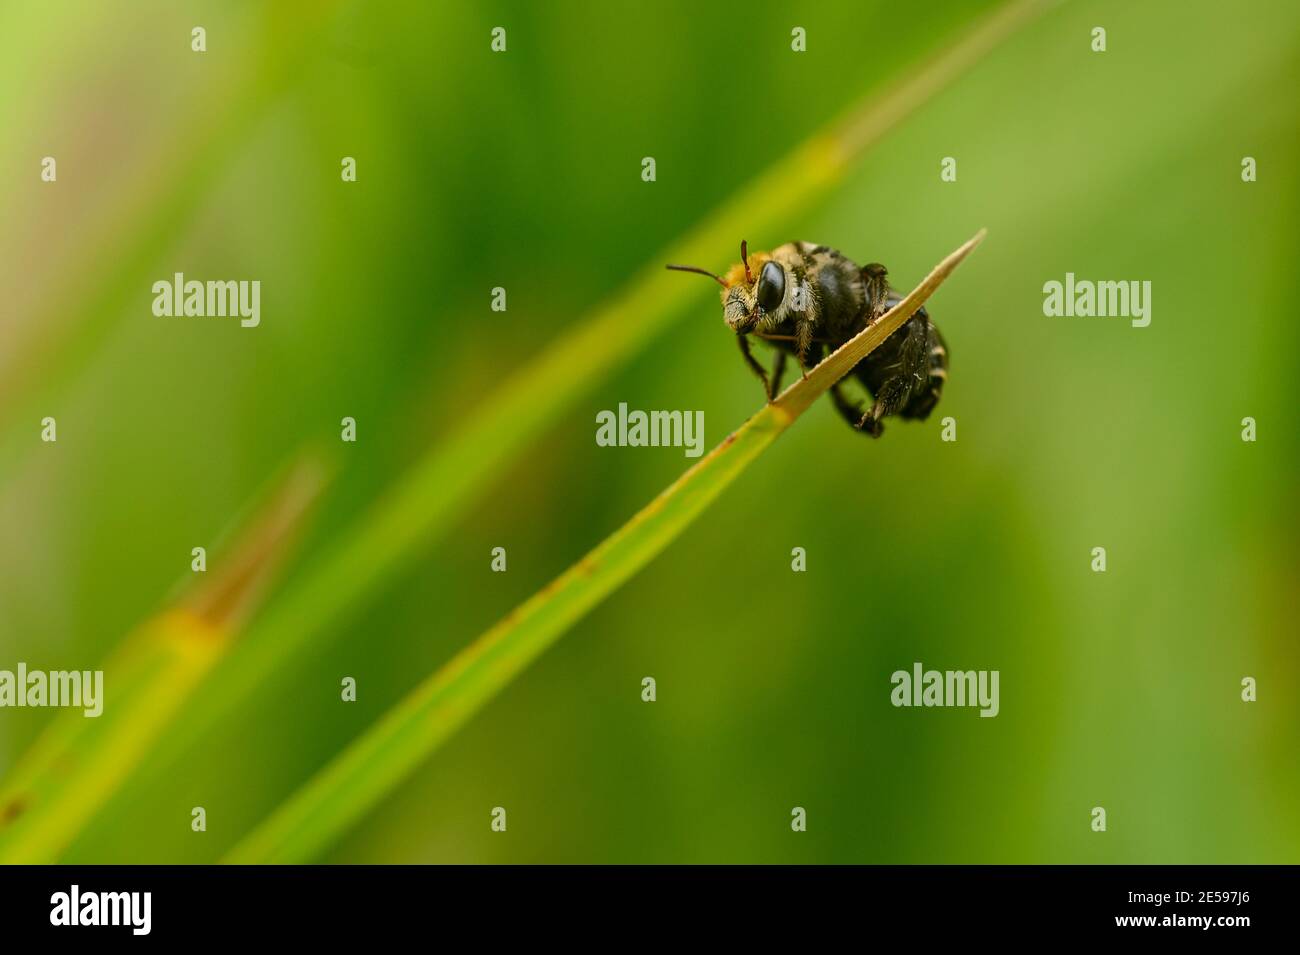 Macro shot of a single bee standing on a thin leaf with blurred green background Stock Photo